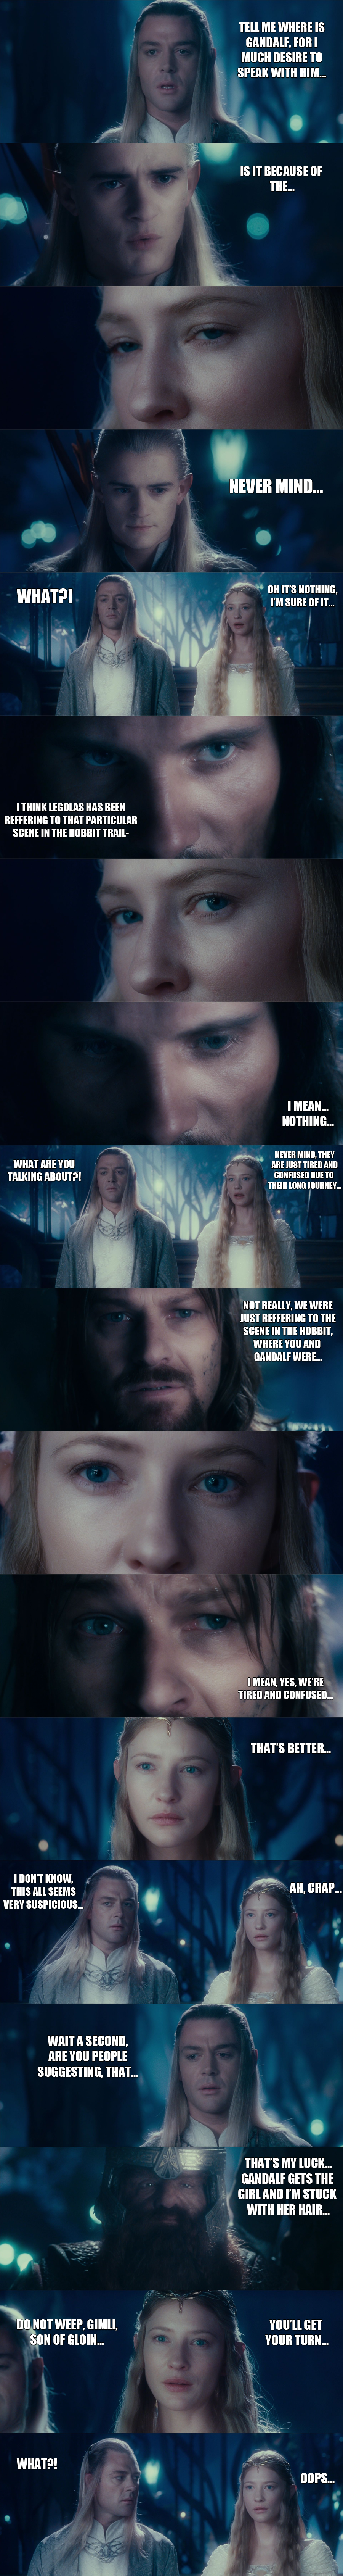 Homosexuality and LotR - Page 5 The_lord_of_the_rings___galadriel__s_secrets____by_yourparodies-d5kn4uq